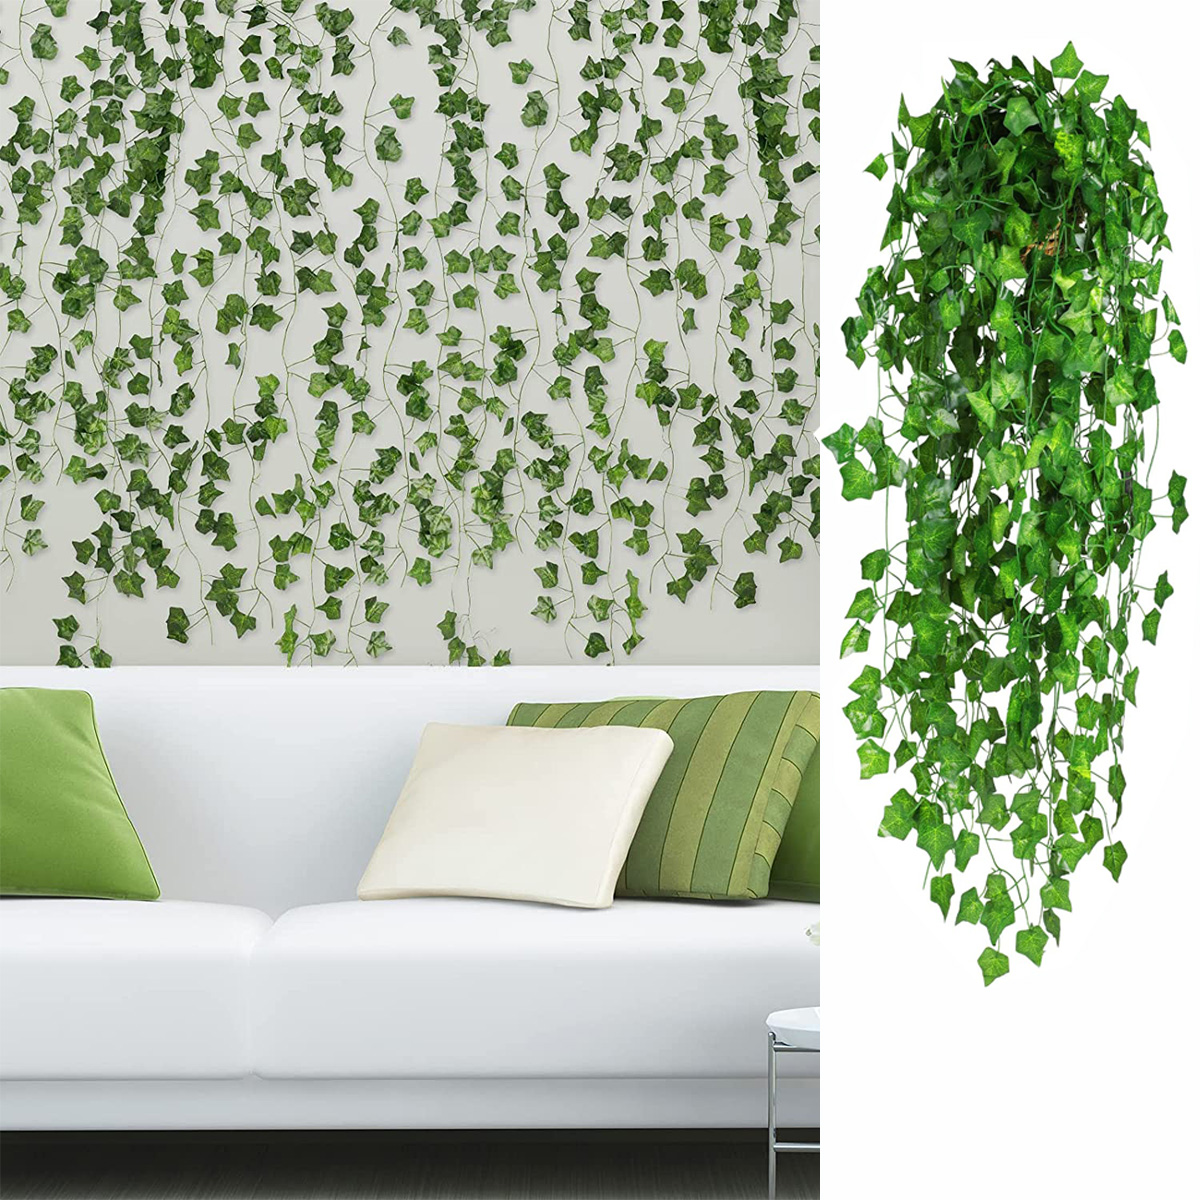 Fake Vines 69ft Artificial Greenery Garland Fake Hanging Plants Greenery  Wall Backdrop for Home Bedroom Wedding Decoration Jungle Theme Party  Supplies